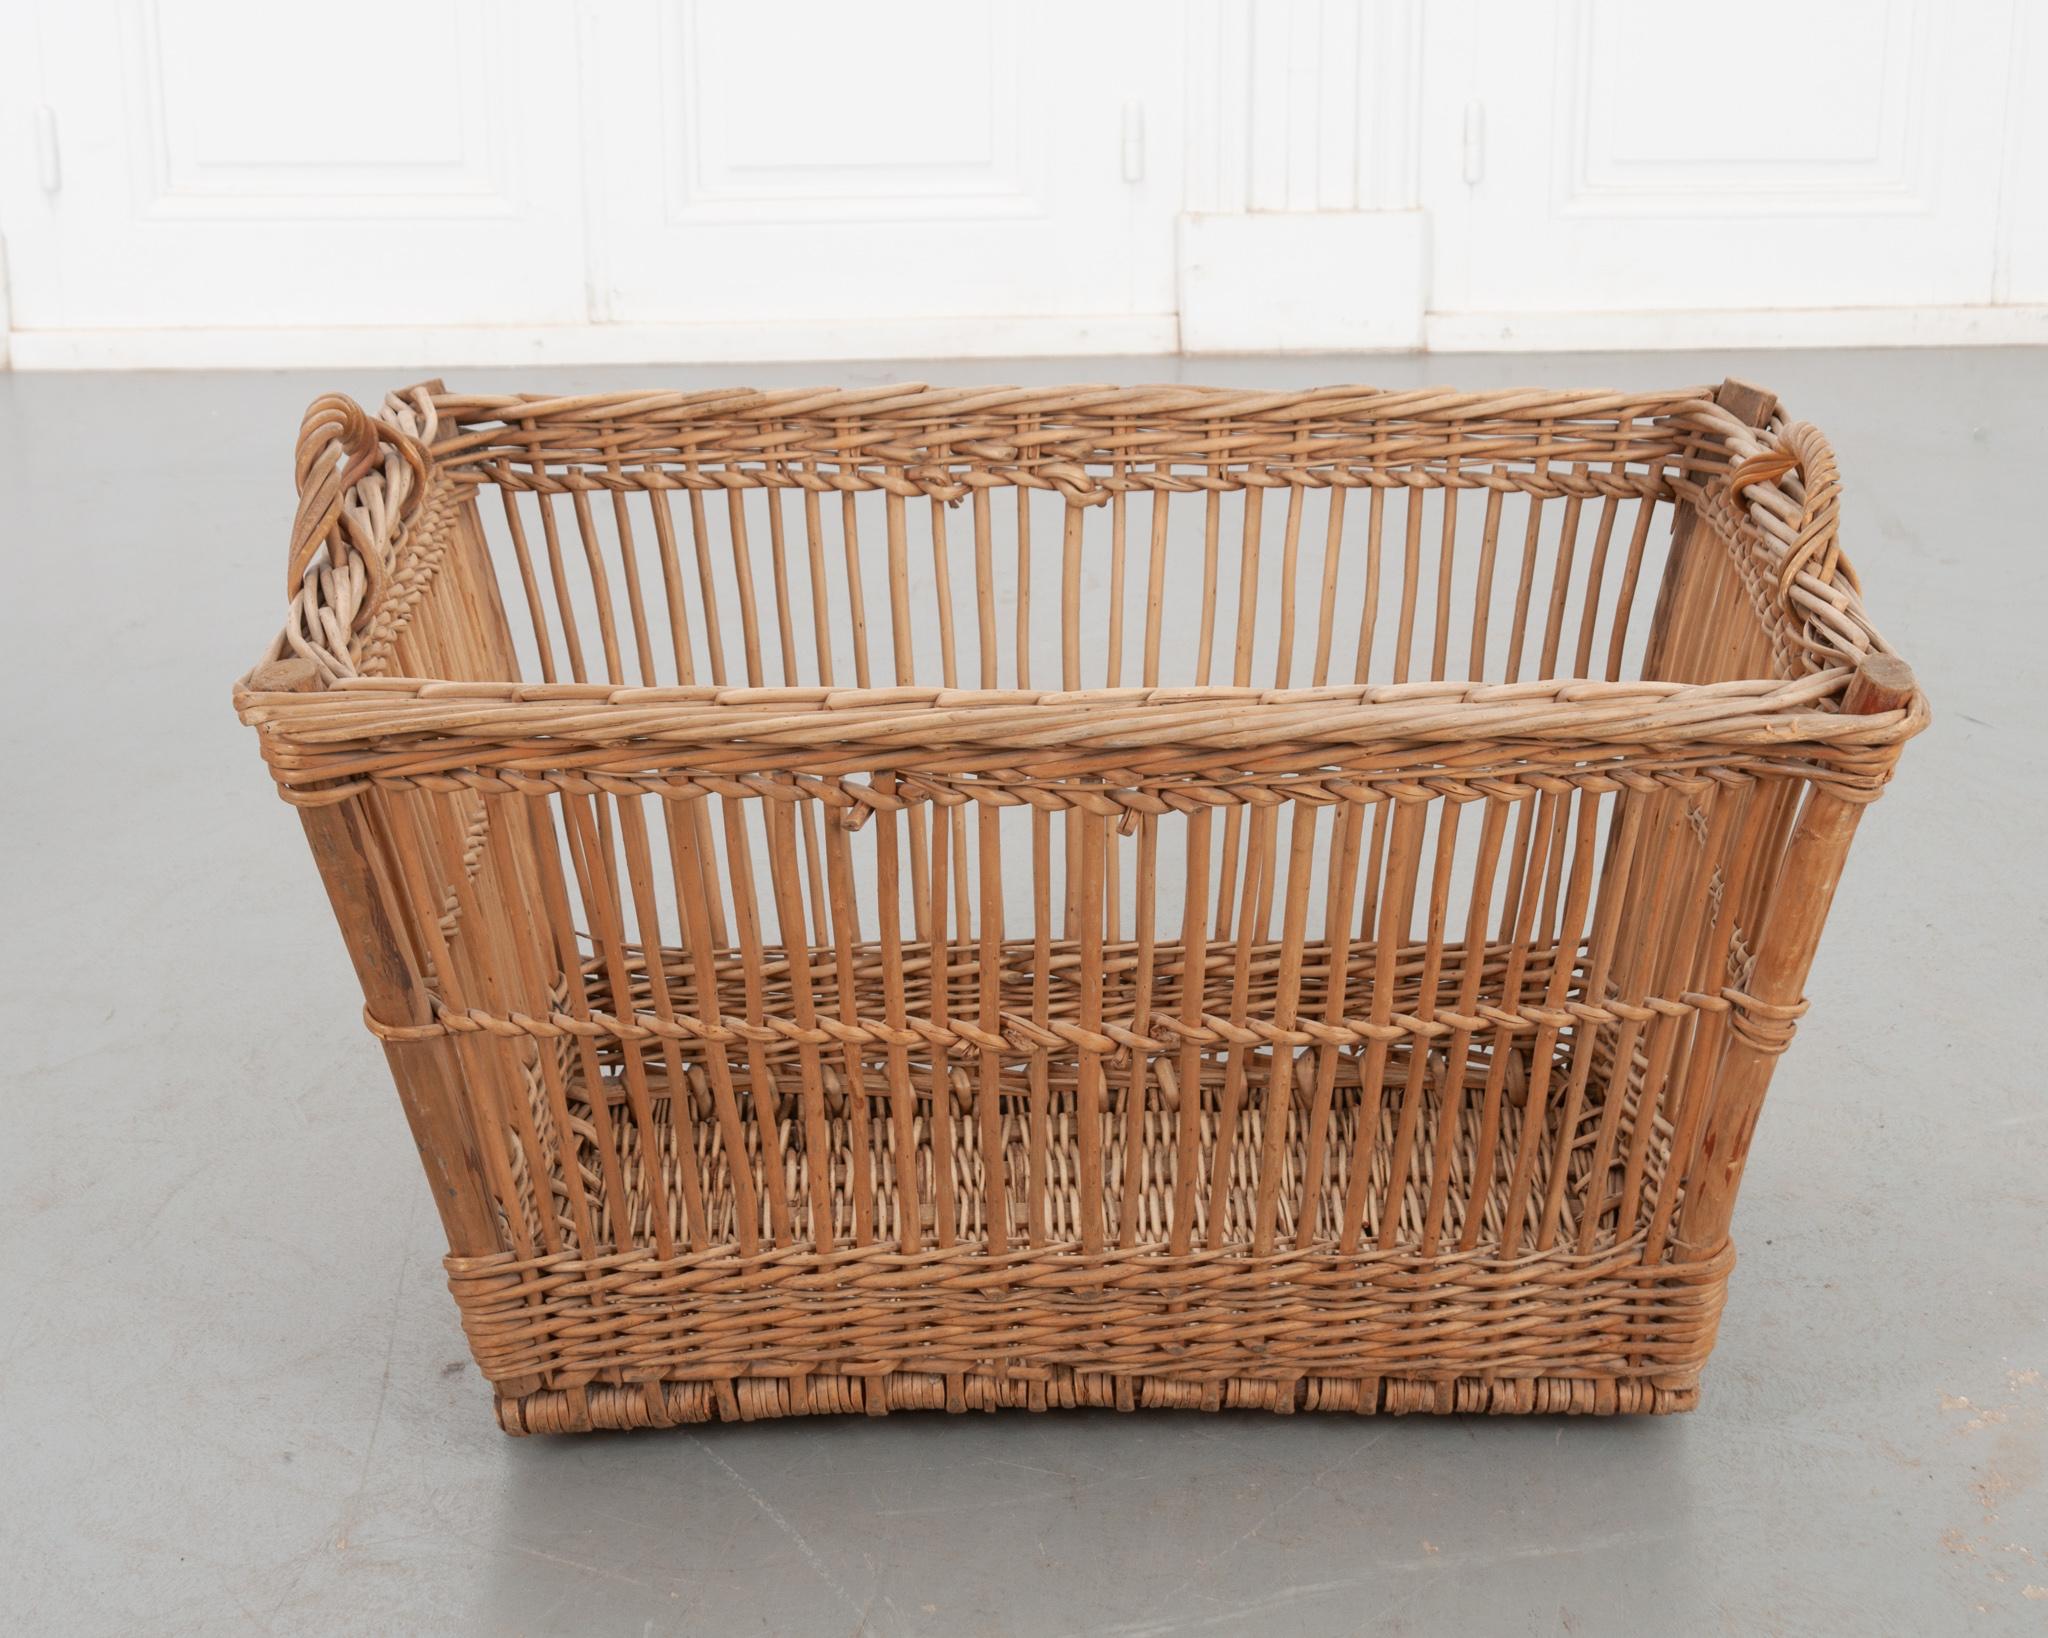 This handwoven wicker basket is as functional as it is beautiful. This basket shows off a cage-like style of weaving in the walls and base for a nice open view of the basket. Great for storing blankets! Make sure to view the detailed images for a